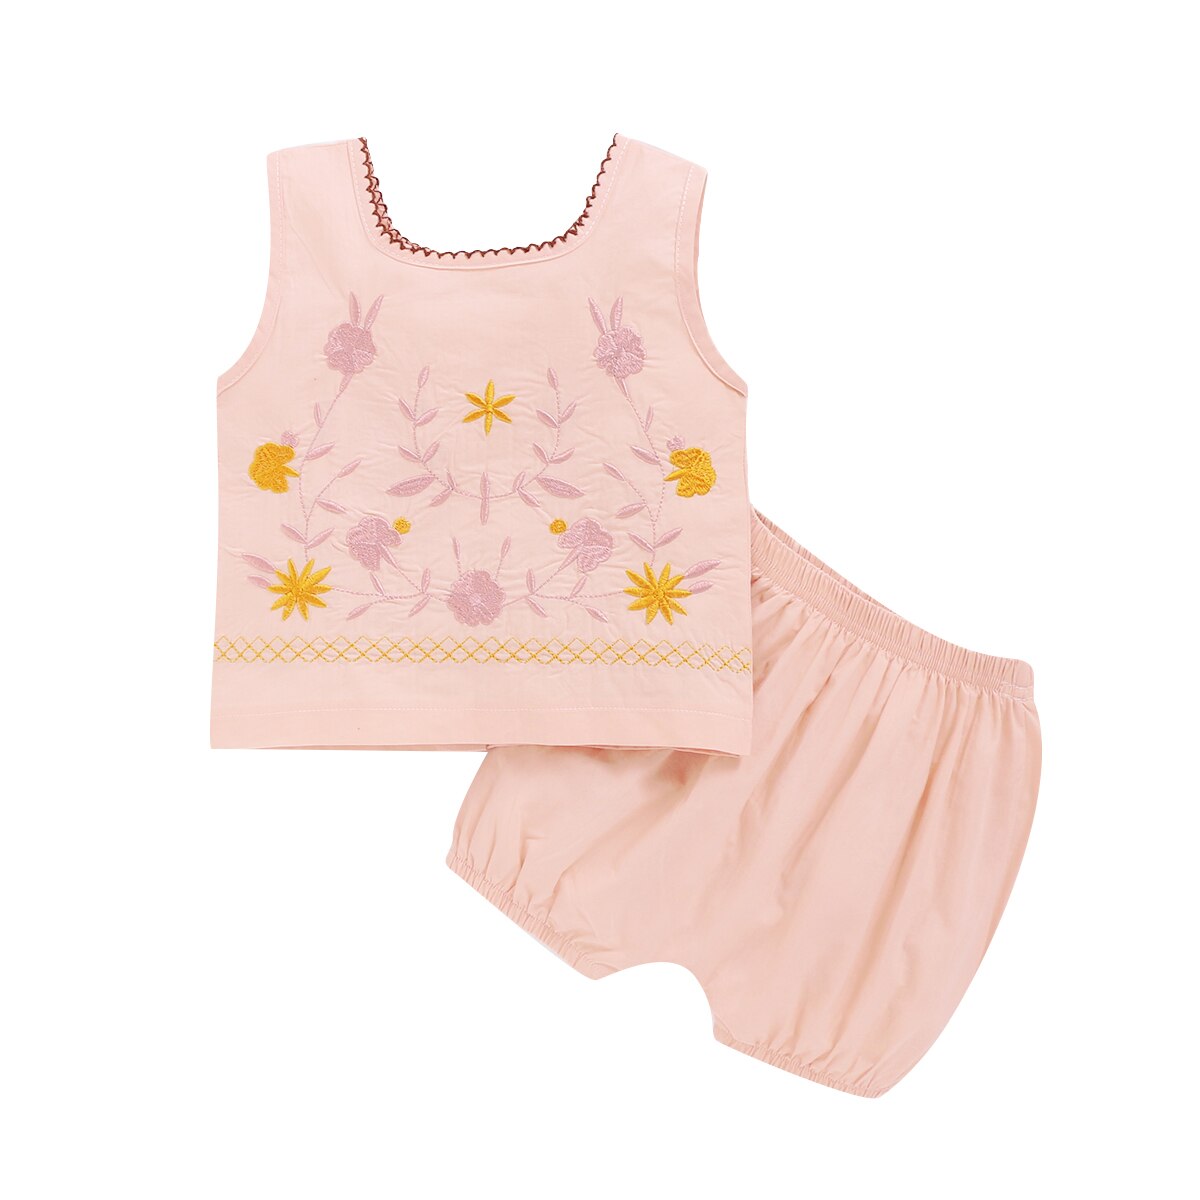 0-3Y Summer Infant Baby Girls Clothes Sets Sleeveless Pink Floral Vest Tops+Shorts Home Comfortable Outfits